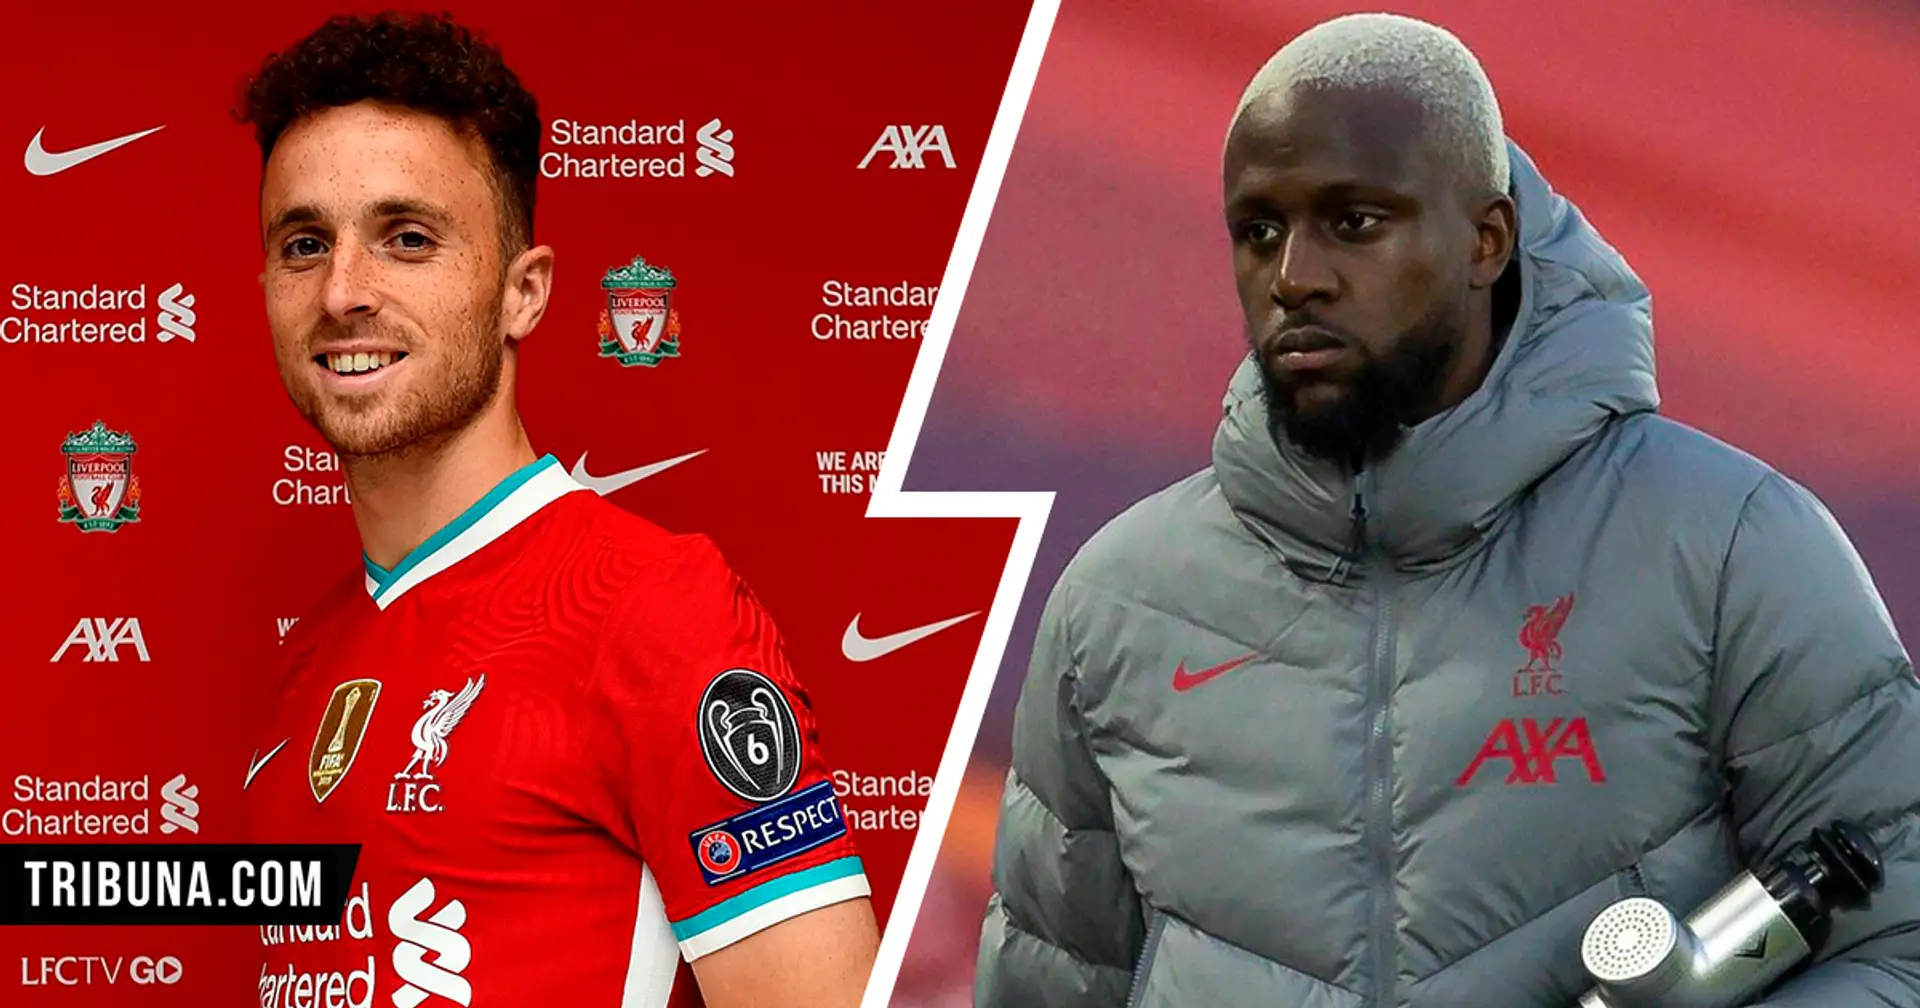 Origi could reportedly consider Liverpool exit following Jota's arrival; Lincoln clash might bring clarity for forward